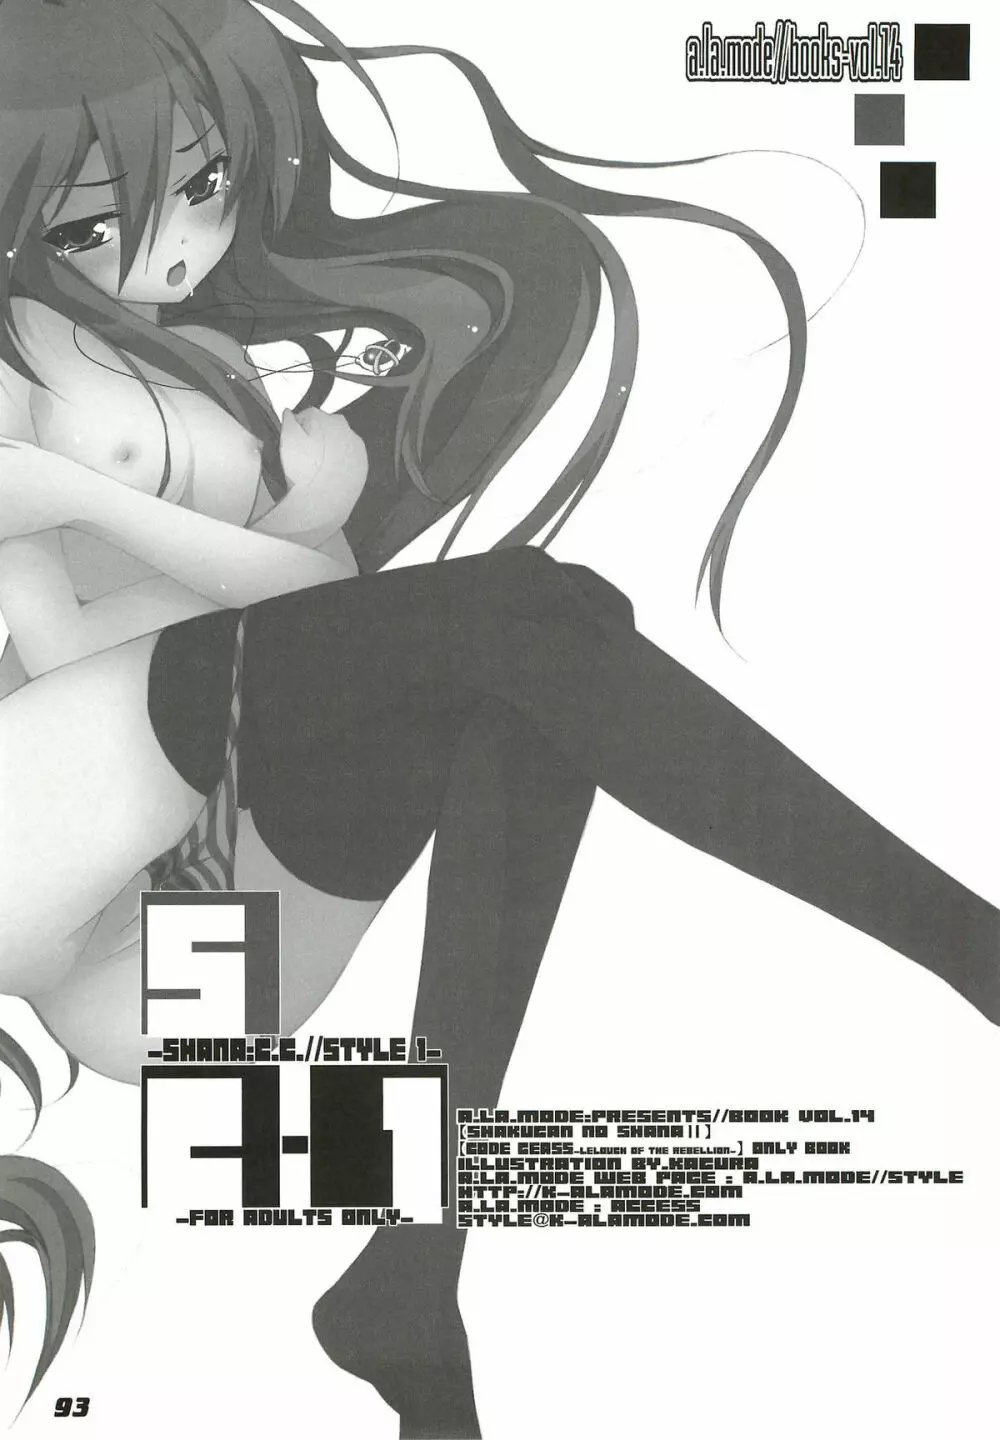 La Collection -Shana／／Style- Page.93